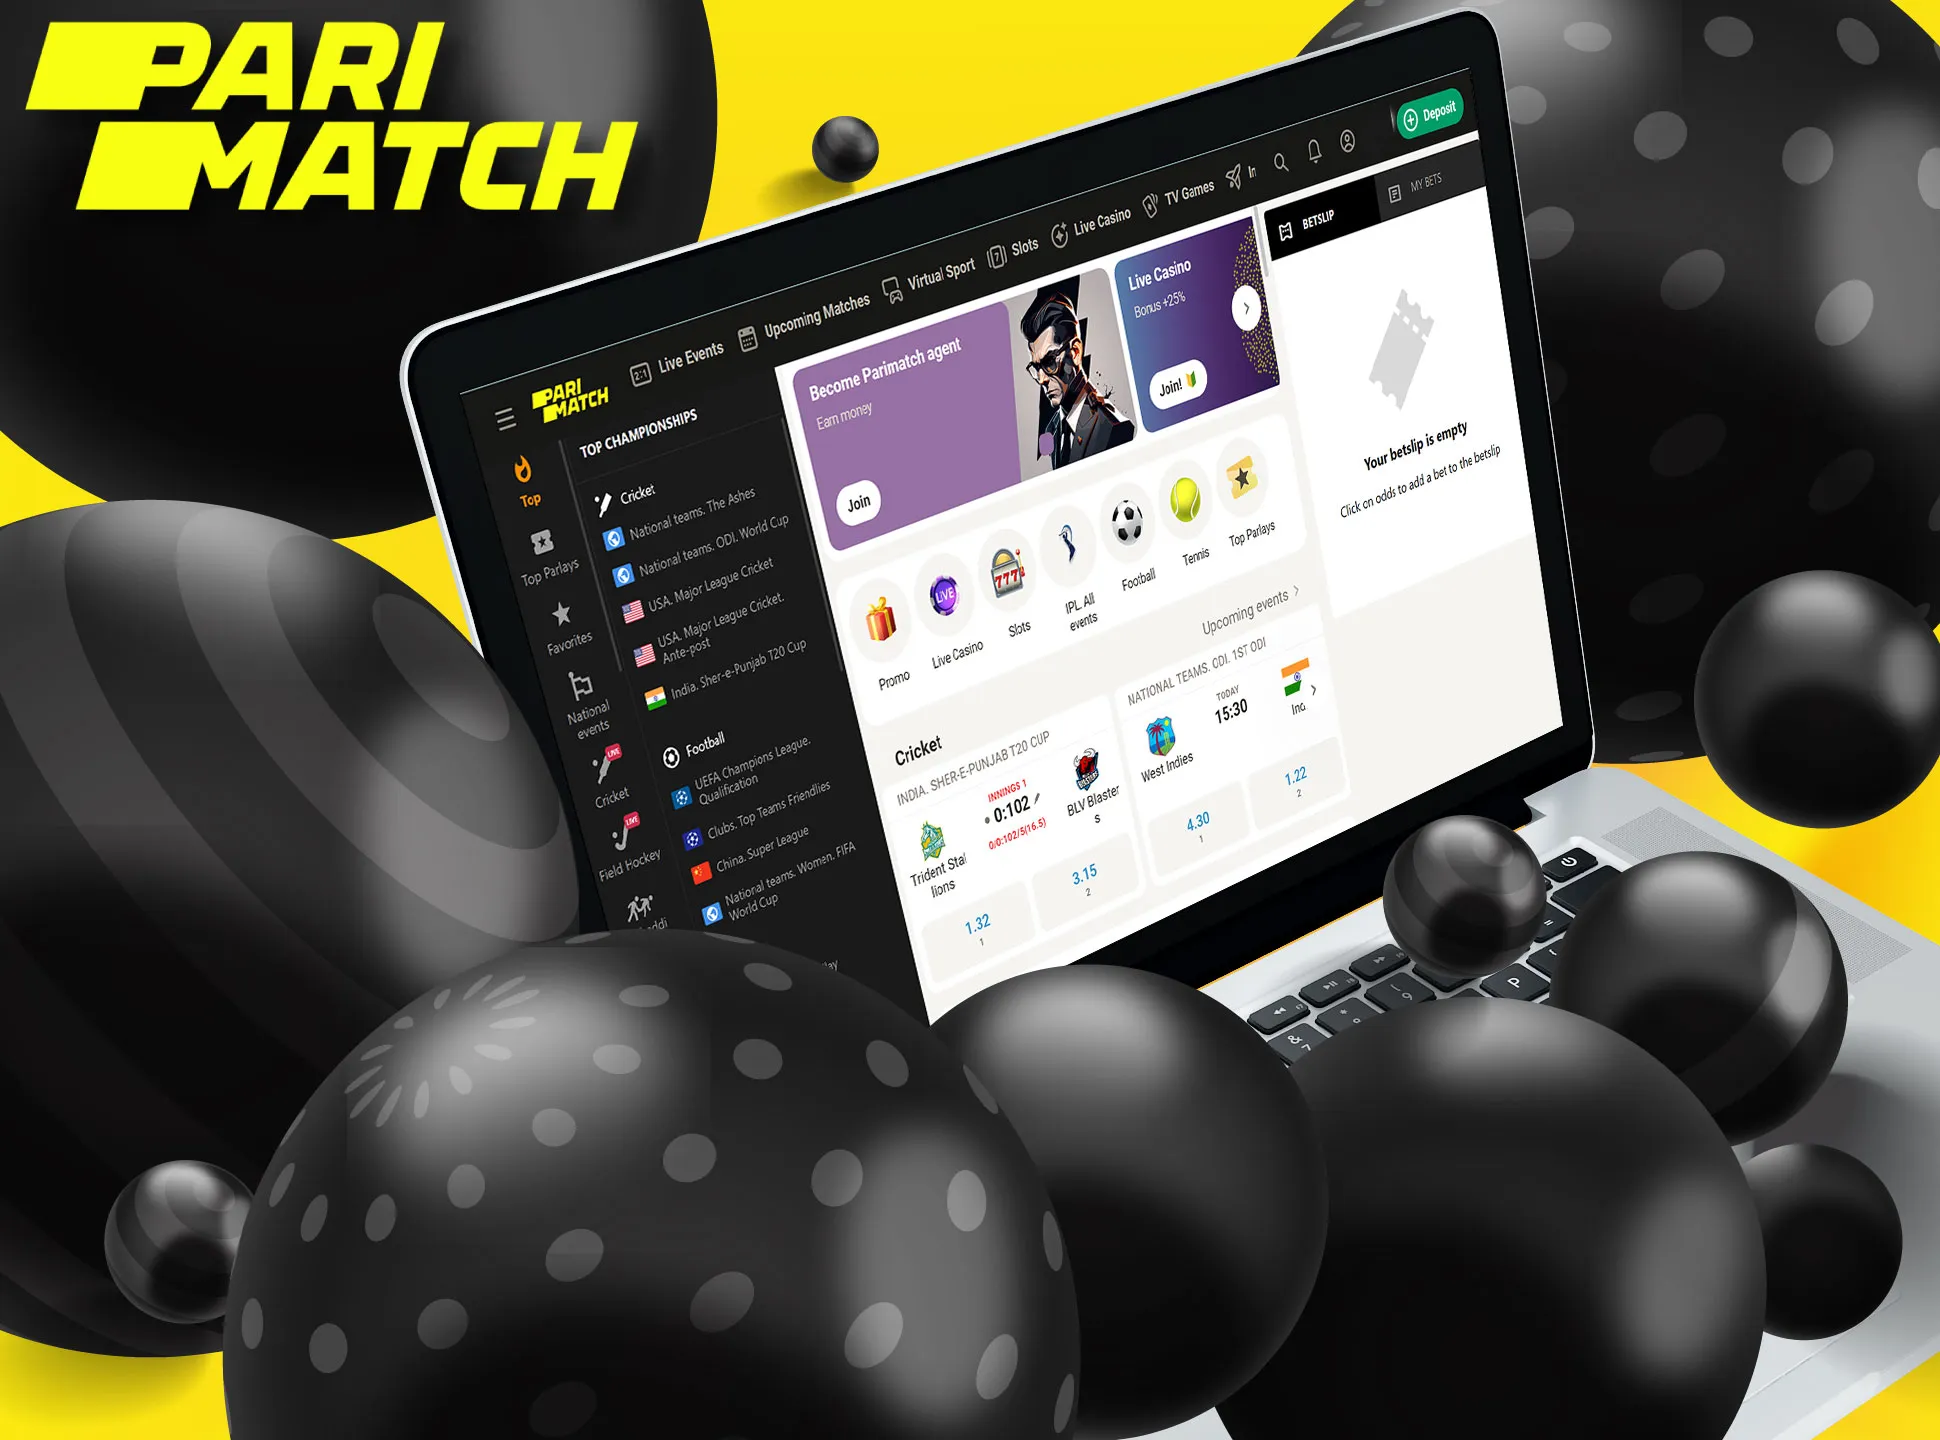 The Parimatch official website has a user-friendly interface and provide users with all necessary features.